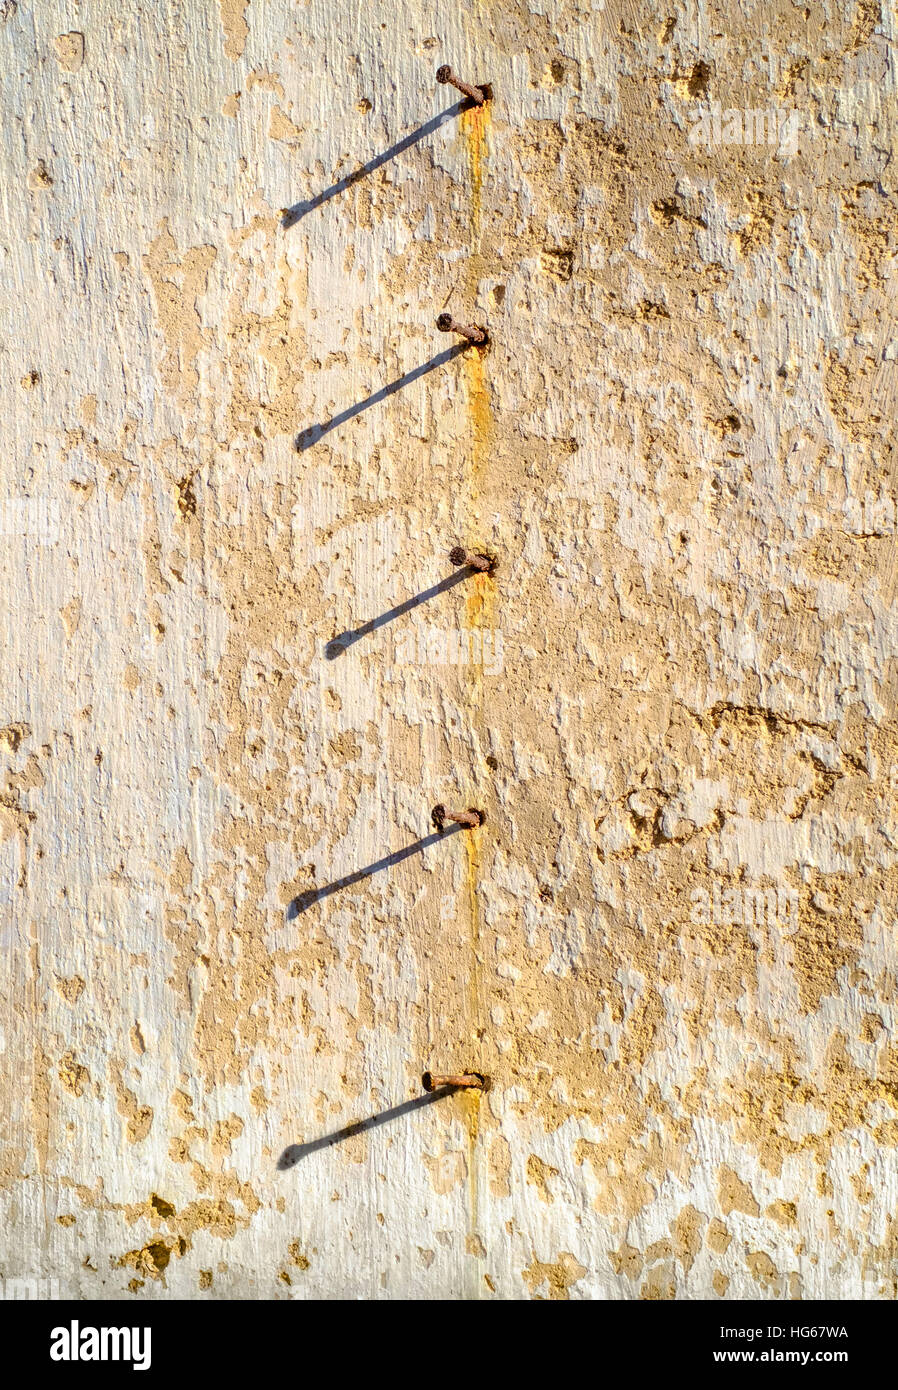 Row of rusty nails hammered into the wall under the afternoon light. Salento, Italy. Stock Photo